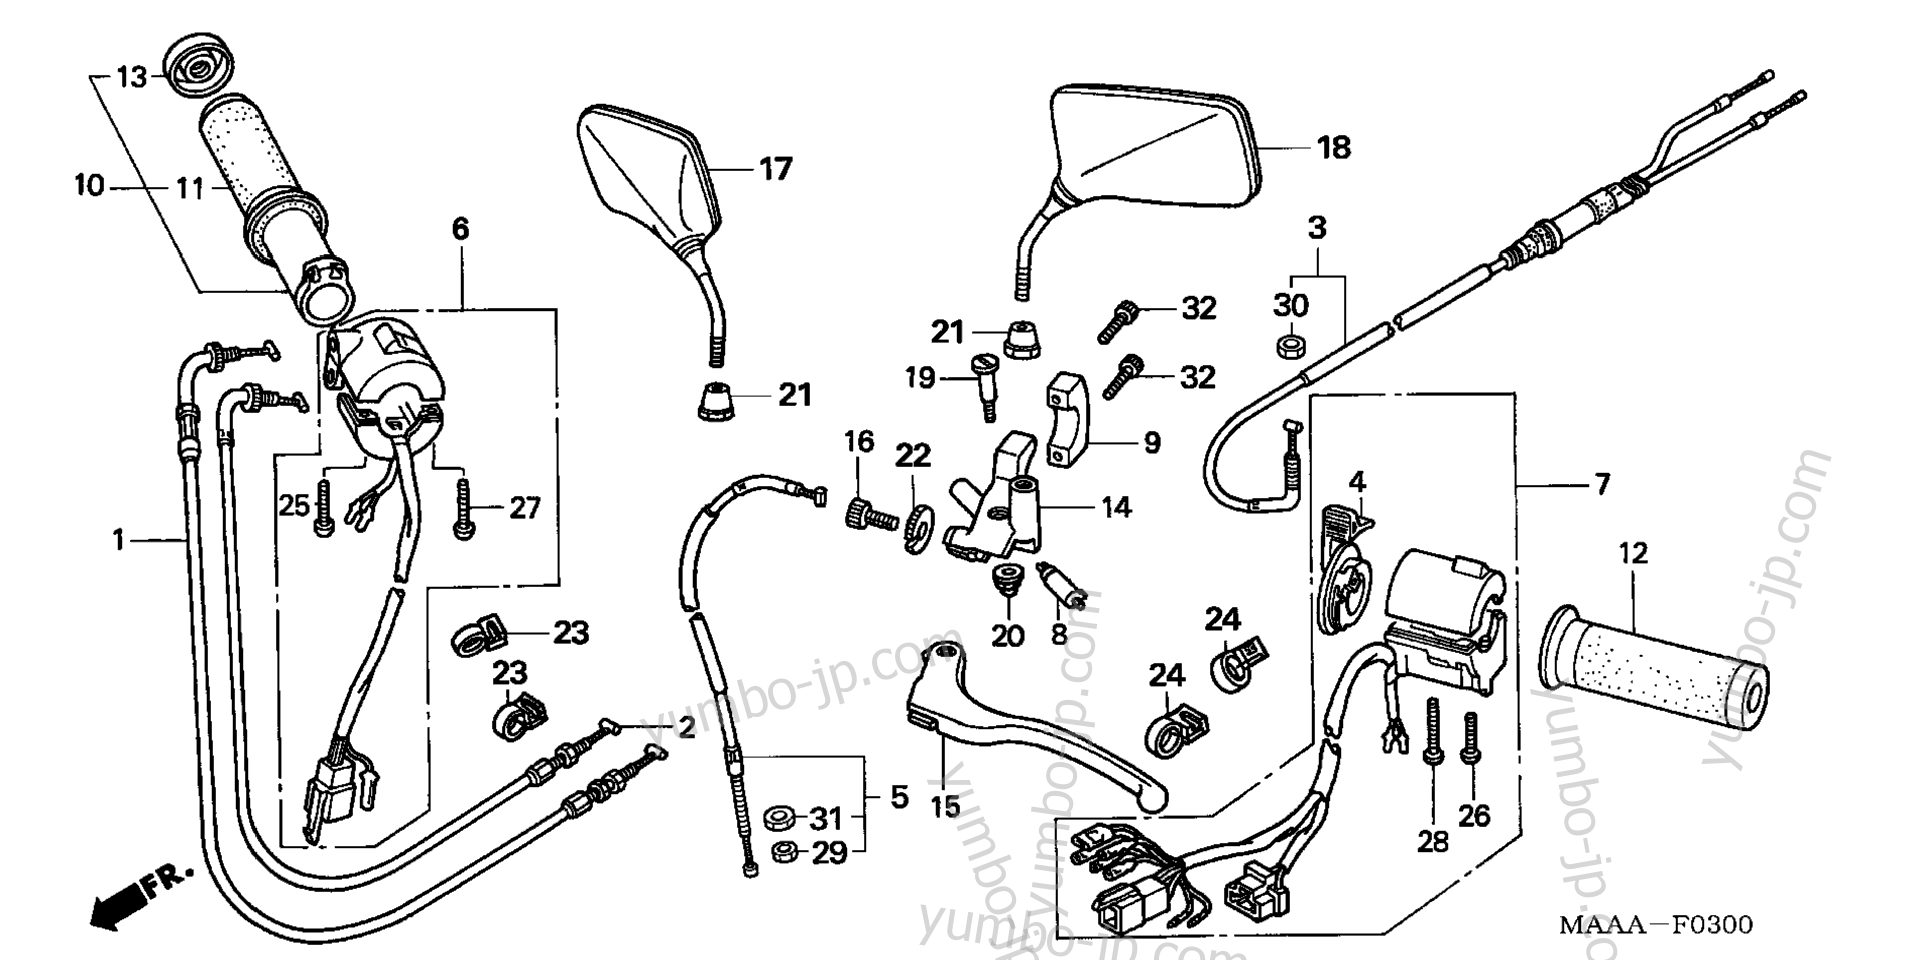 HANDLE LEVER / SWITCH / CABLE for motorcycles HONDA VT1100C A 2006 year